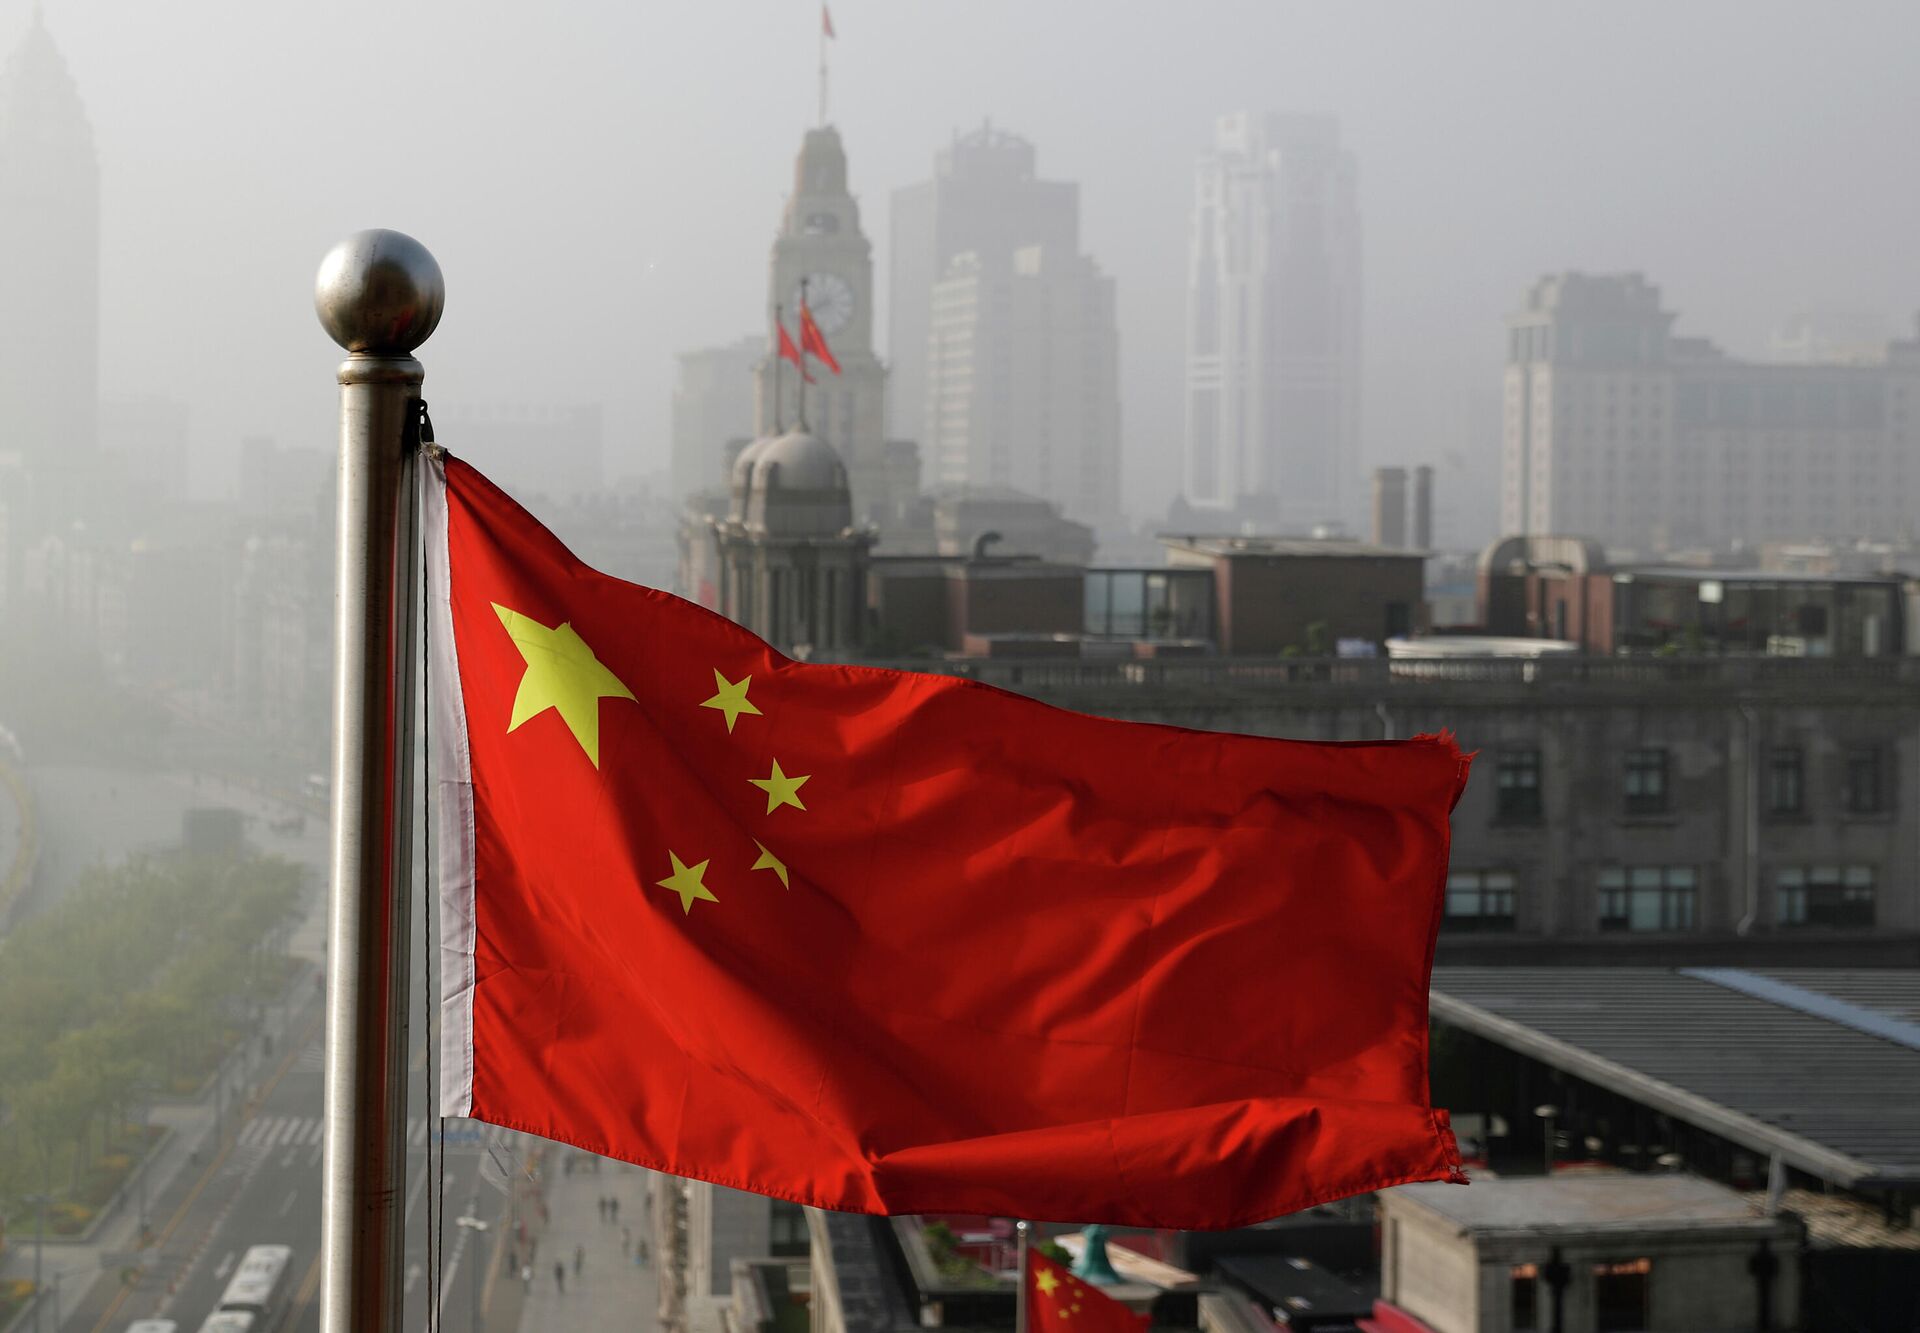 FILE - In this April 14, 2016 file photo, a Chinese national flag flutters against the office buildings in Shanghai, China - Sputnik International, 1920, 02.11.2021